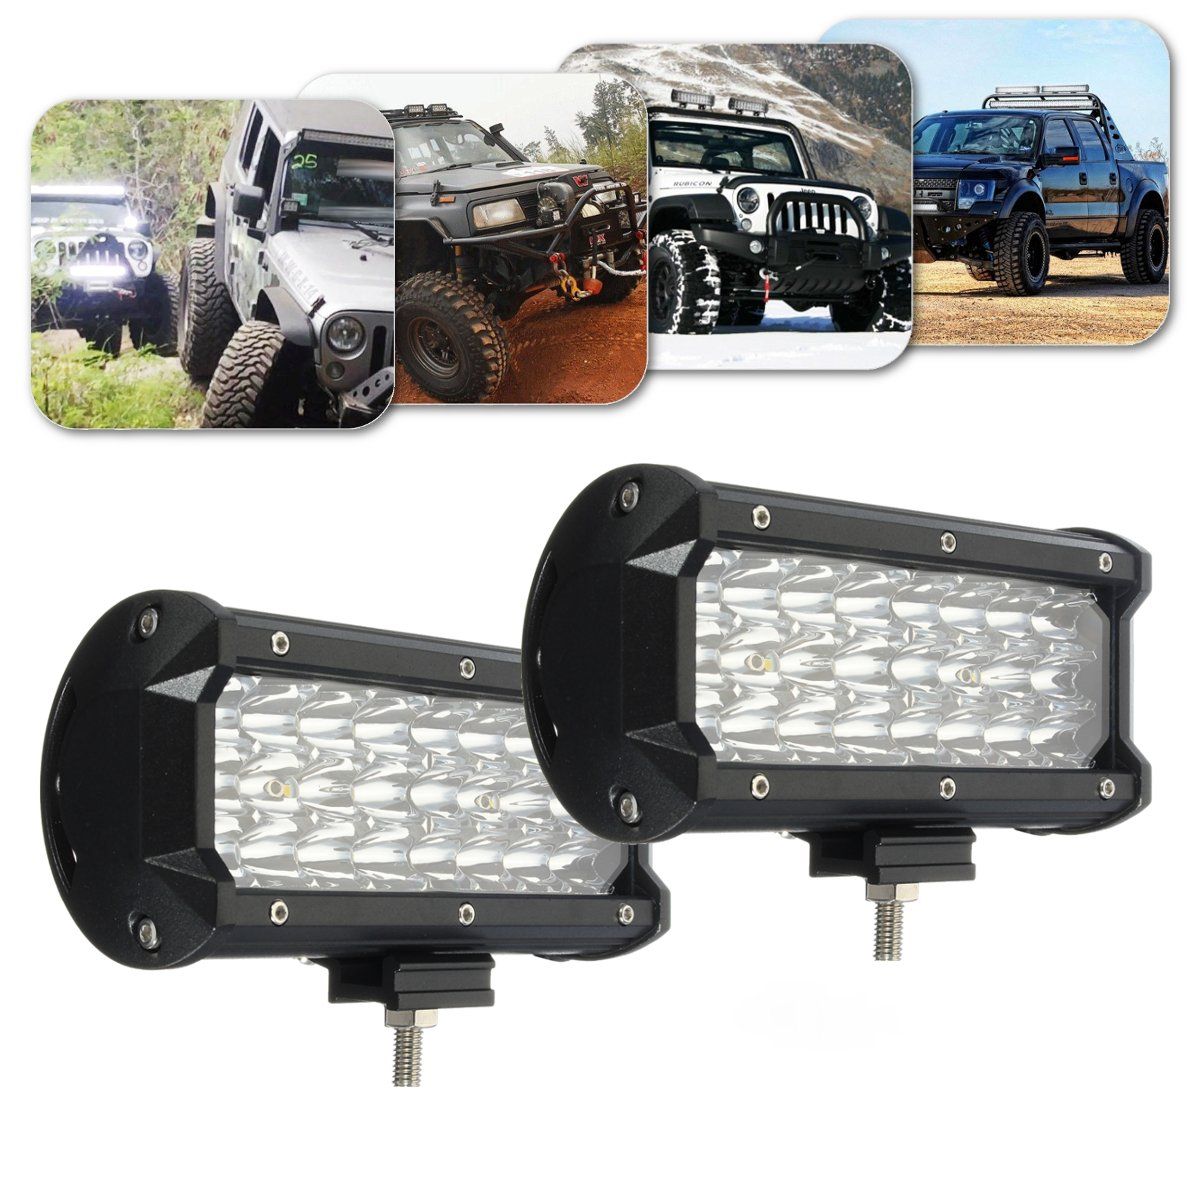 Car-72W-24-Dual-Row-Spot-LED-Light-Bar-for-Off-road-Trucks-Motorcycles-Automobiles-1214774